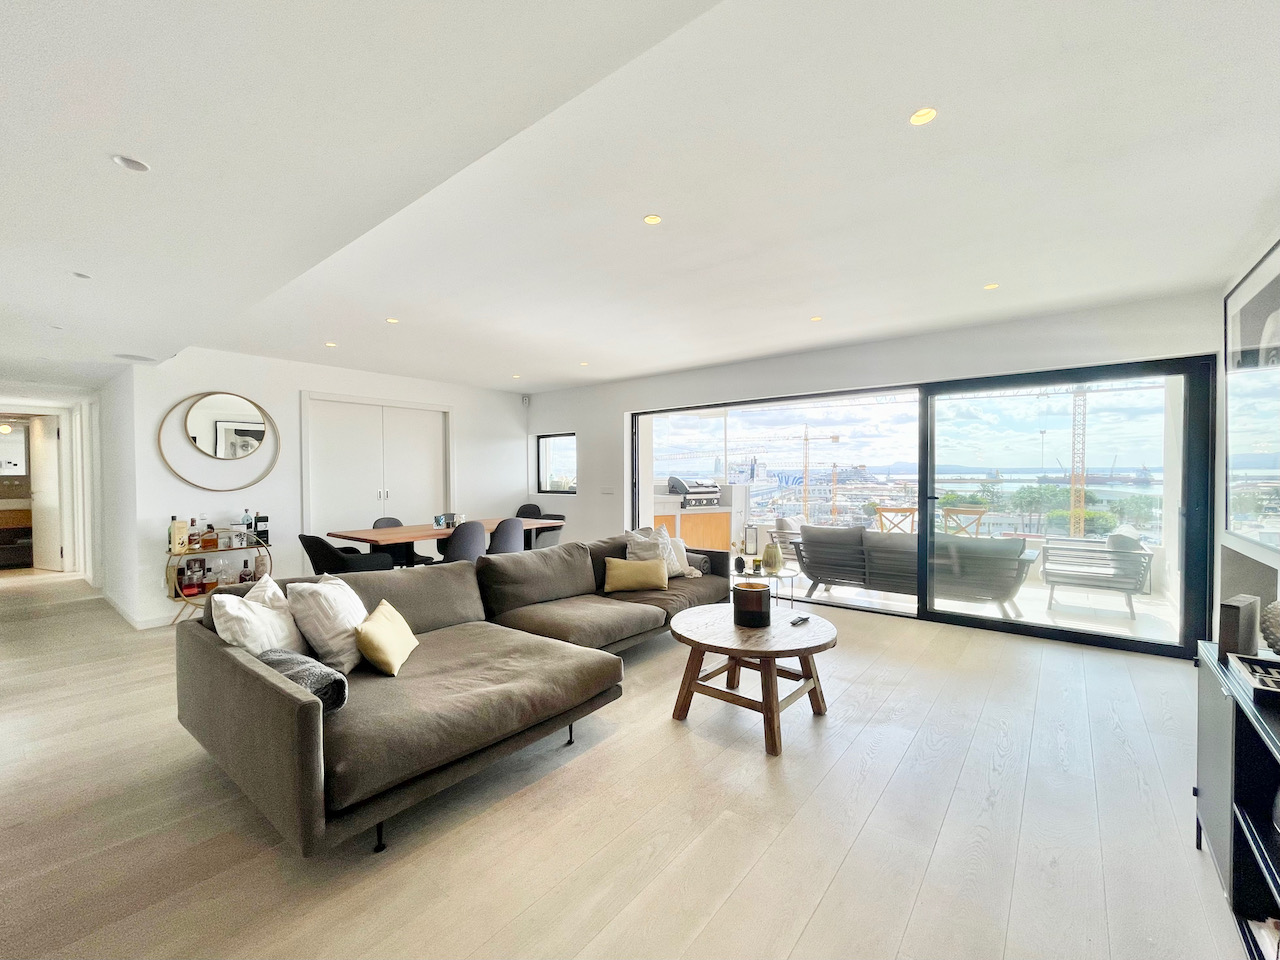 Designer flat on the seafront, fully equipped and fully refurbished with stunning views of the cathedral and the sea